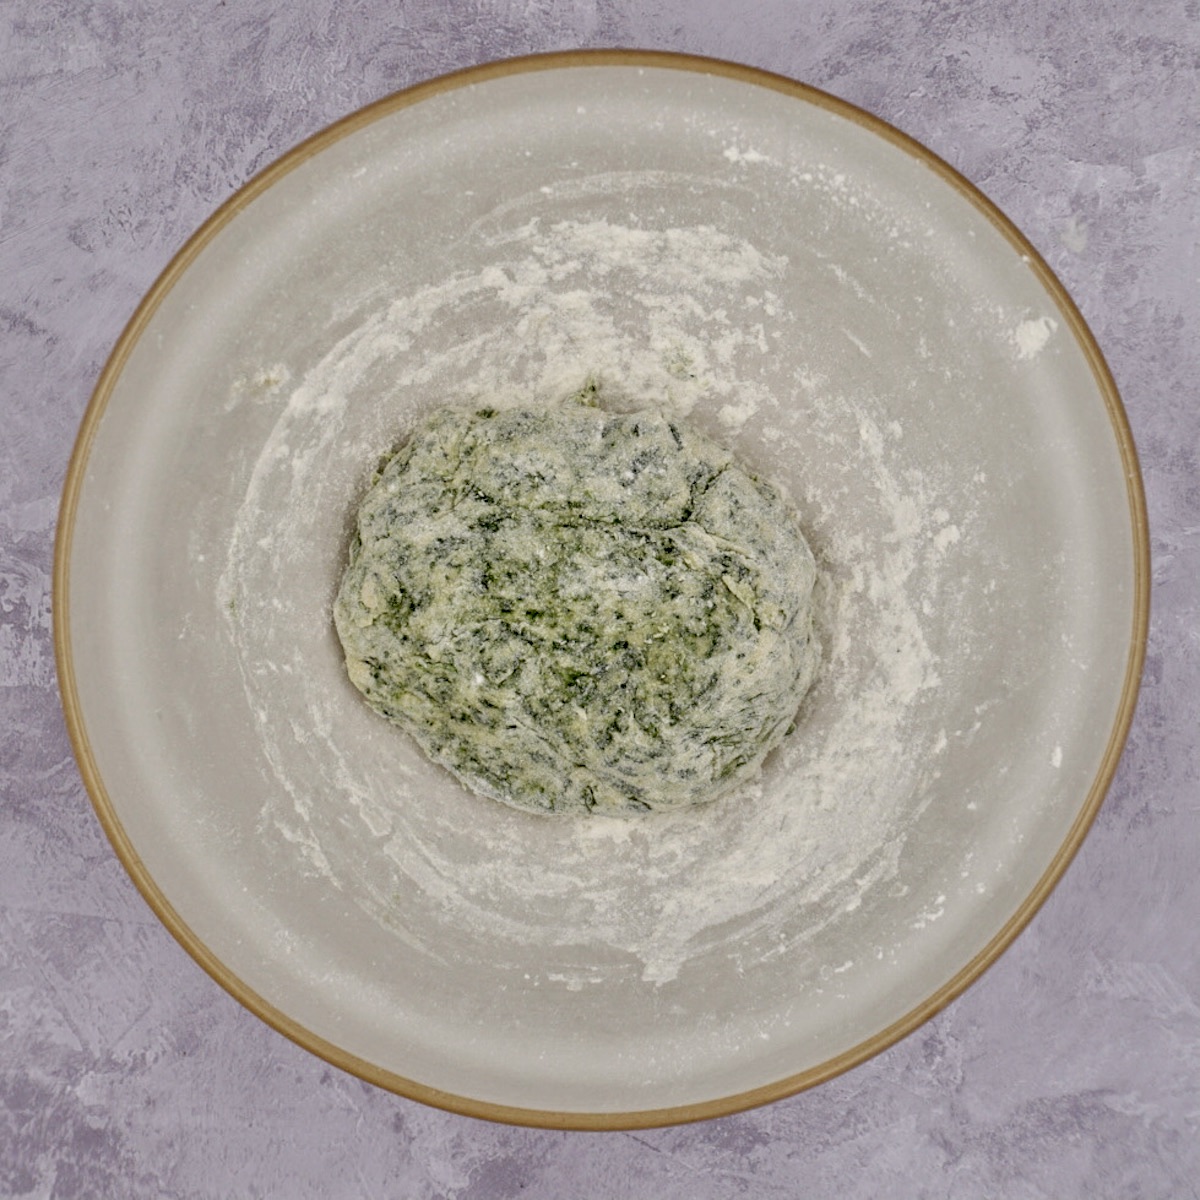 Spinach pasta dough in a bowl